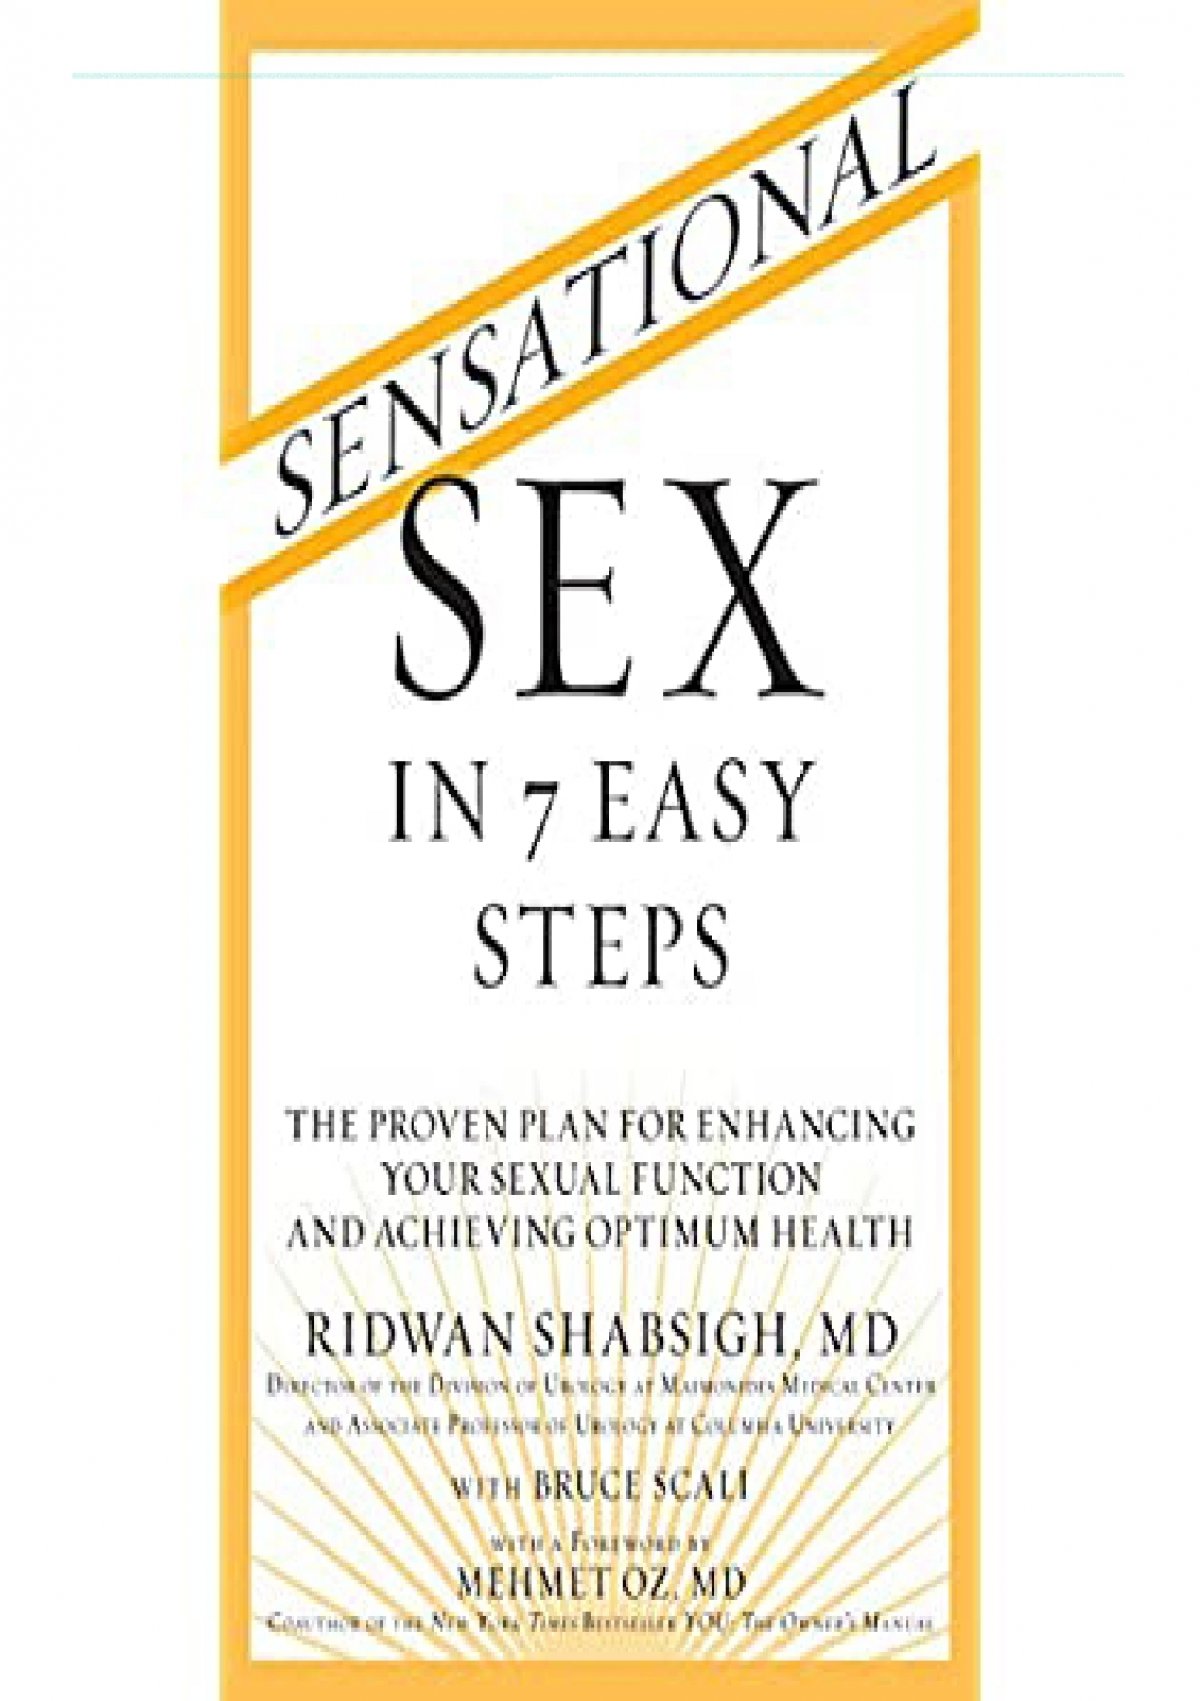 Pdf Sensational Sex In 7 Easy Steps The Proven Plan For Enhancing Your Sexual Function And 3607